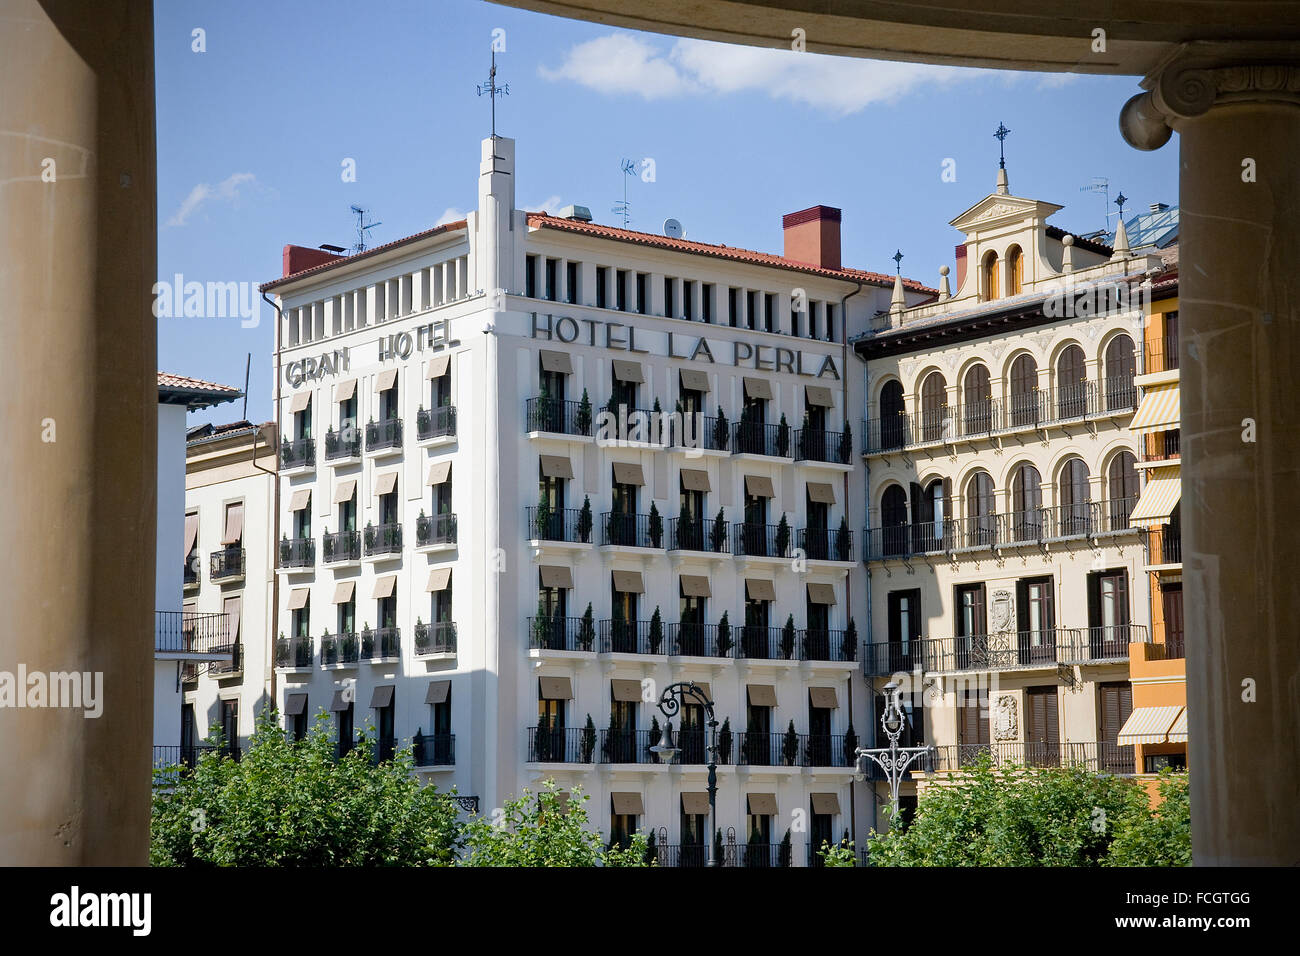 Hotel Perla High Resolution Stock Photography and Images - Alamy